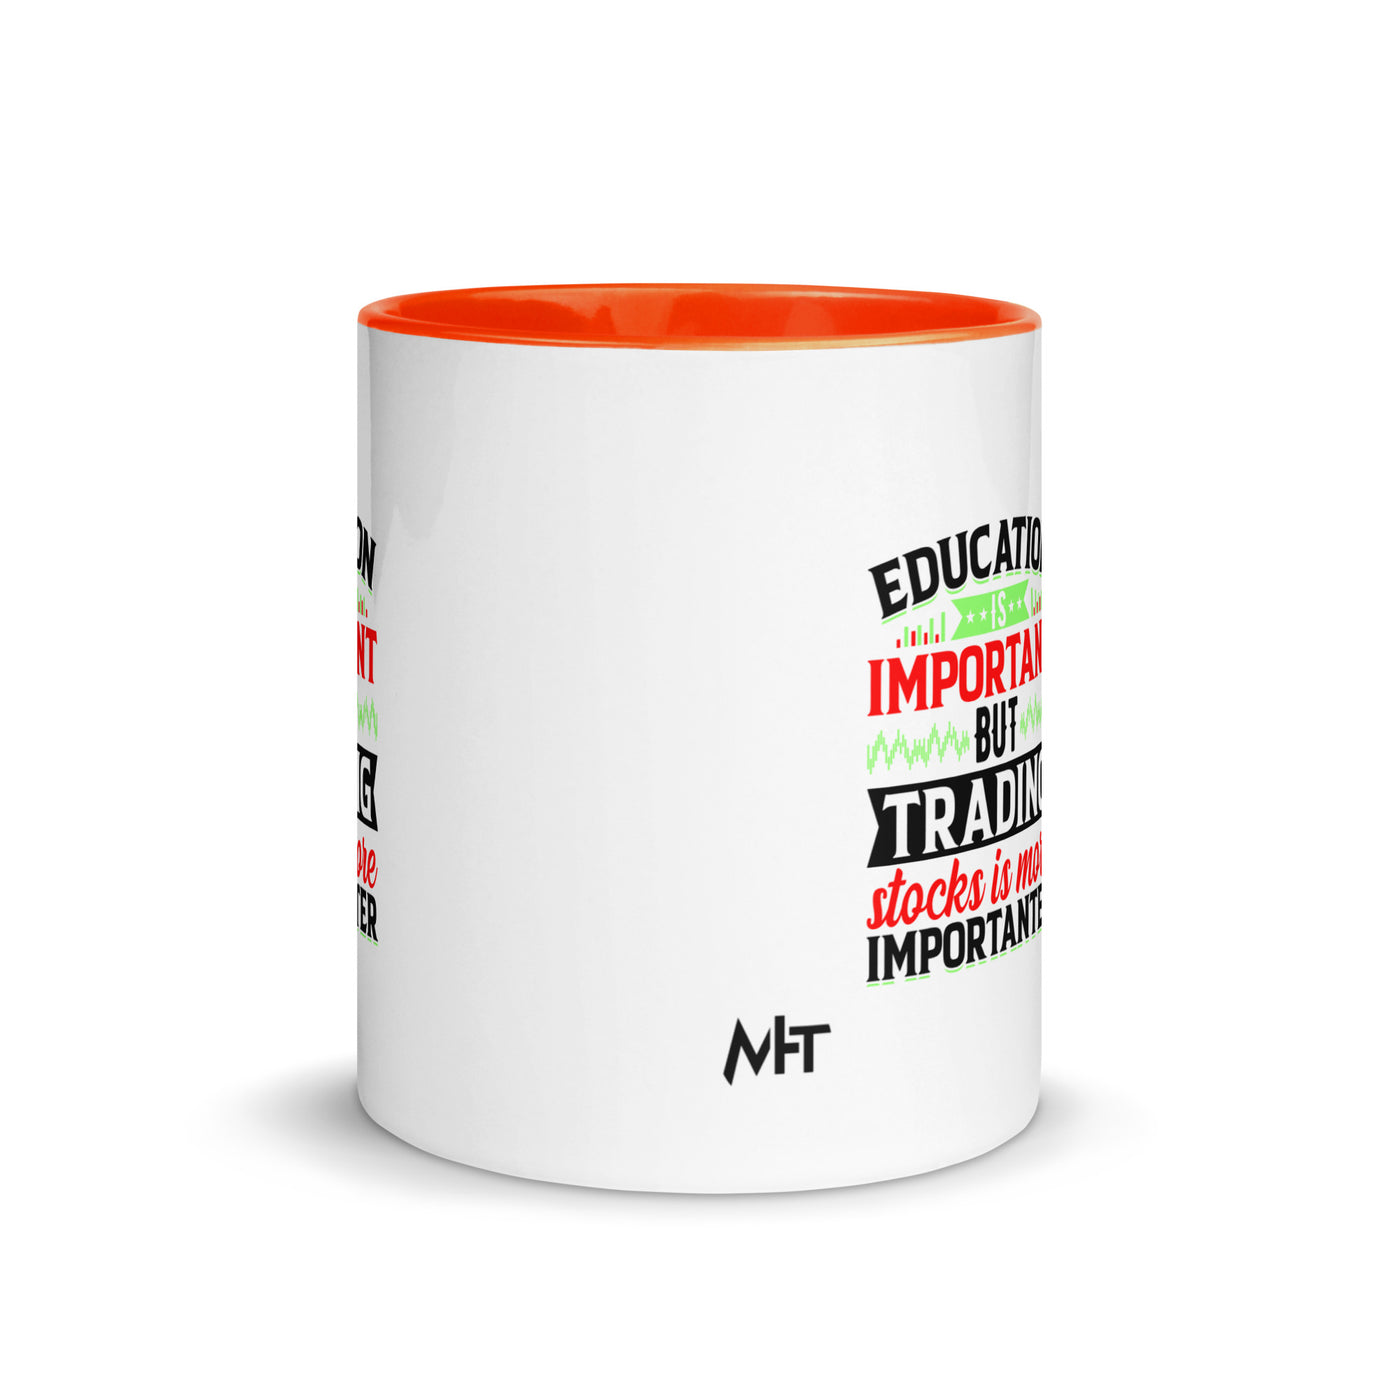 Education is important but trading stocks is more importanter in Dark Text - Mug with Color Inside